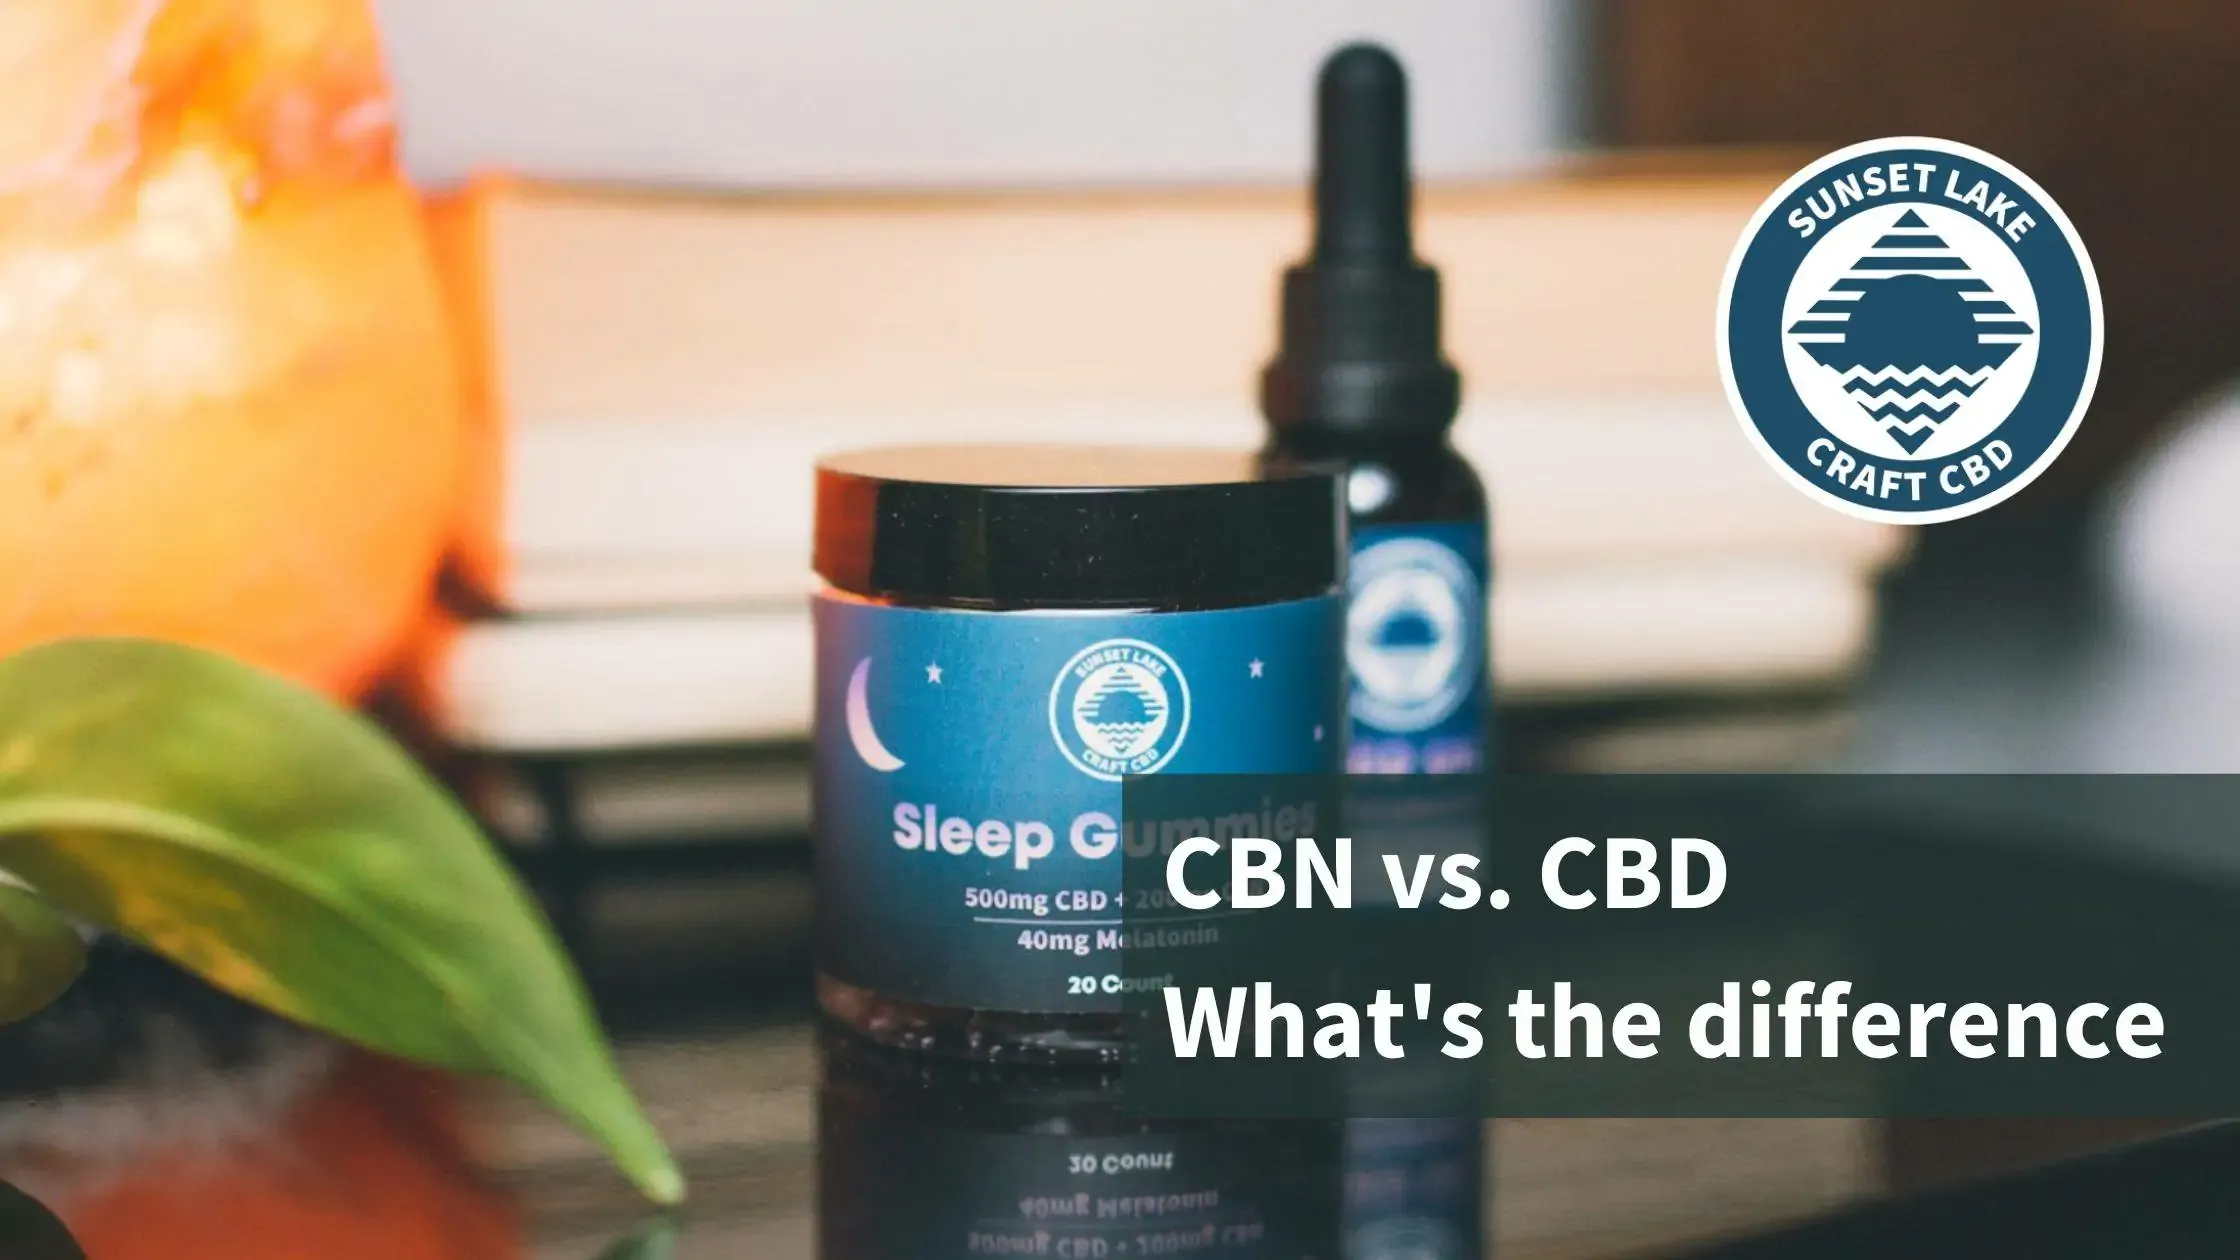 Sleep gummies and tincture from Sunset Lake CBD. Text reads "CBN vs. CBD: What's the difference?"